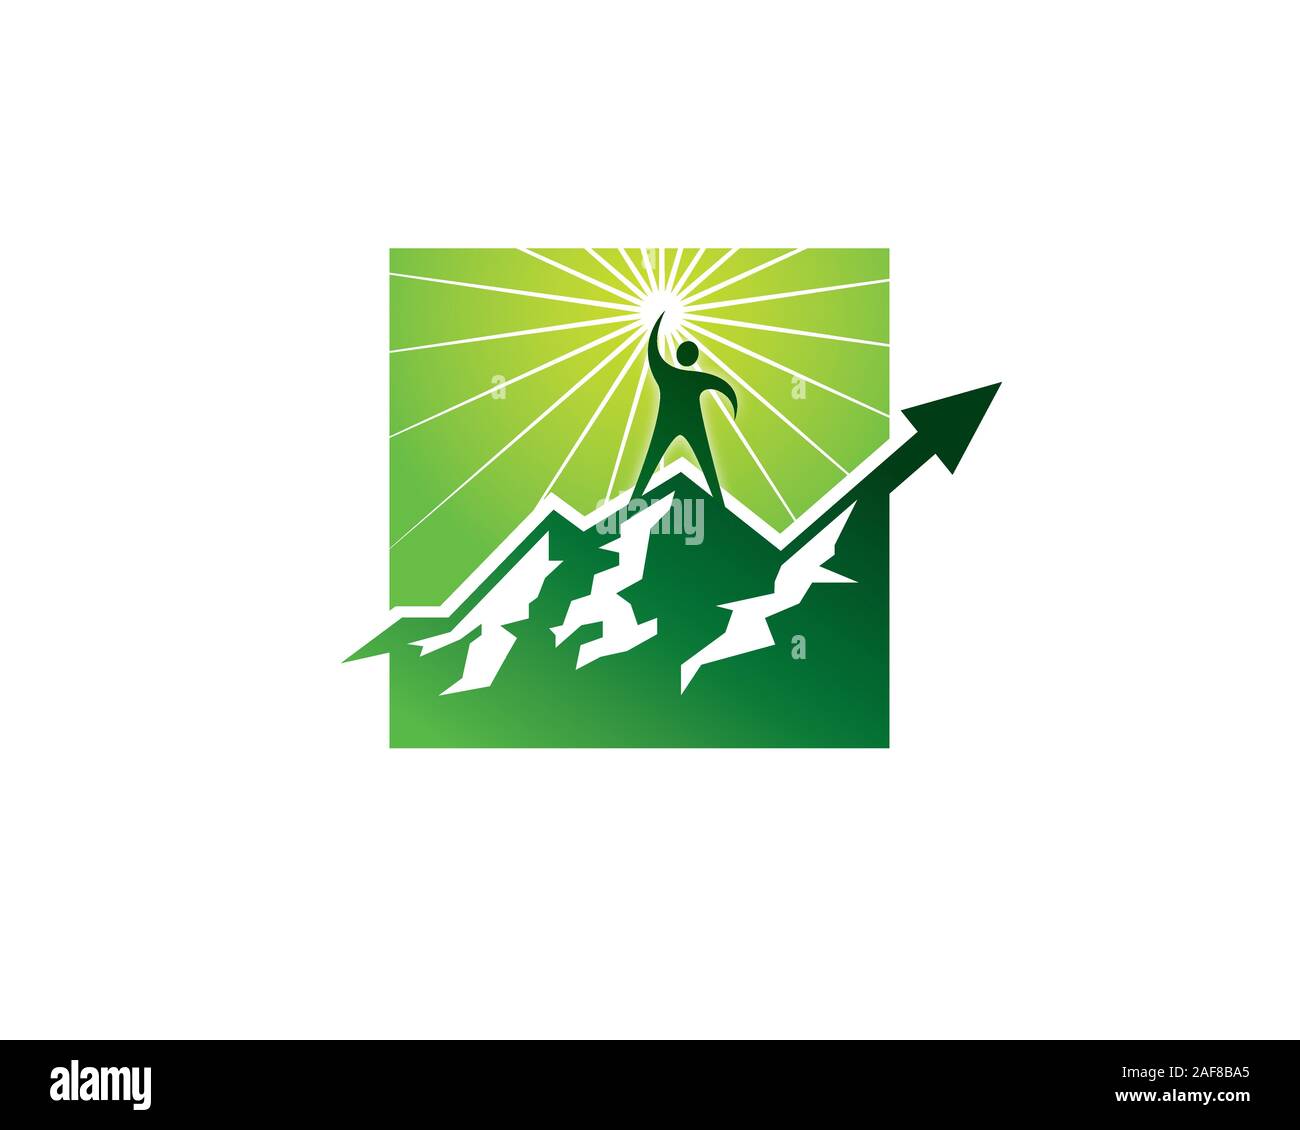 SUCCEED TO THE TOP OF THE MOUNTAIN LOGO Stock Vector